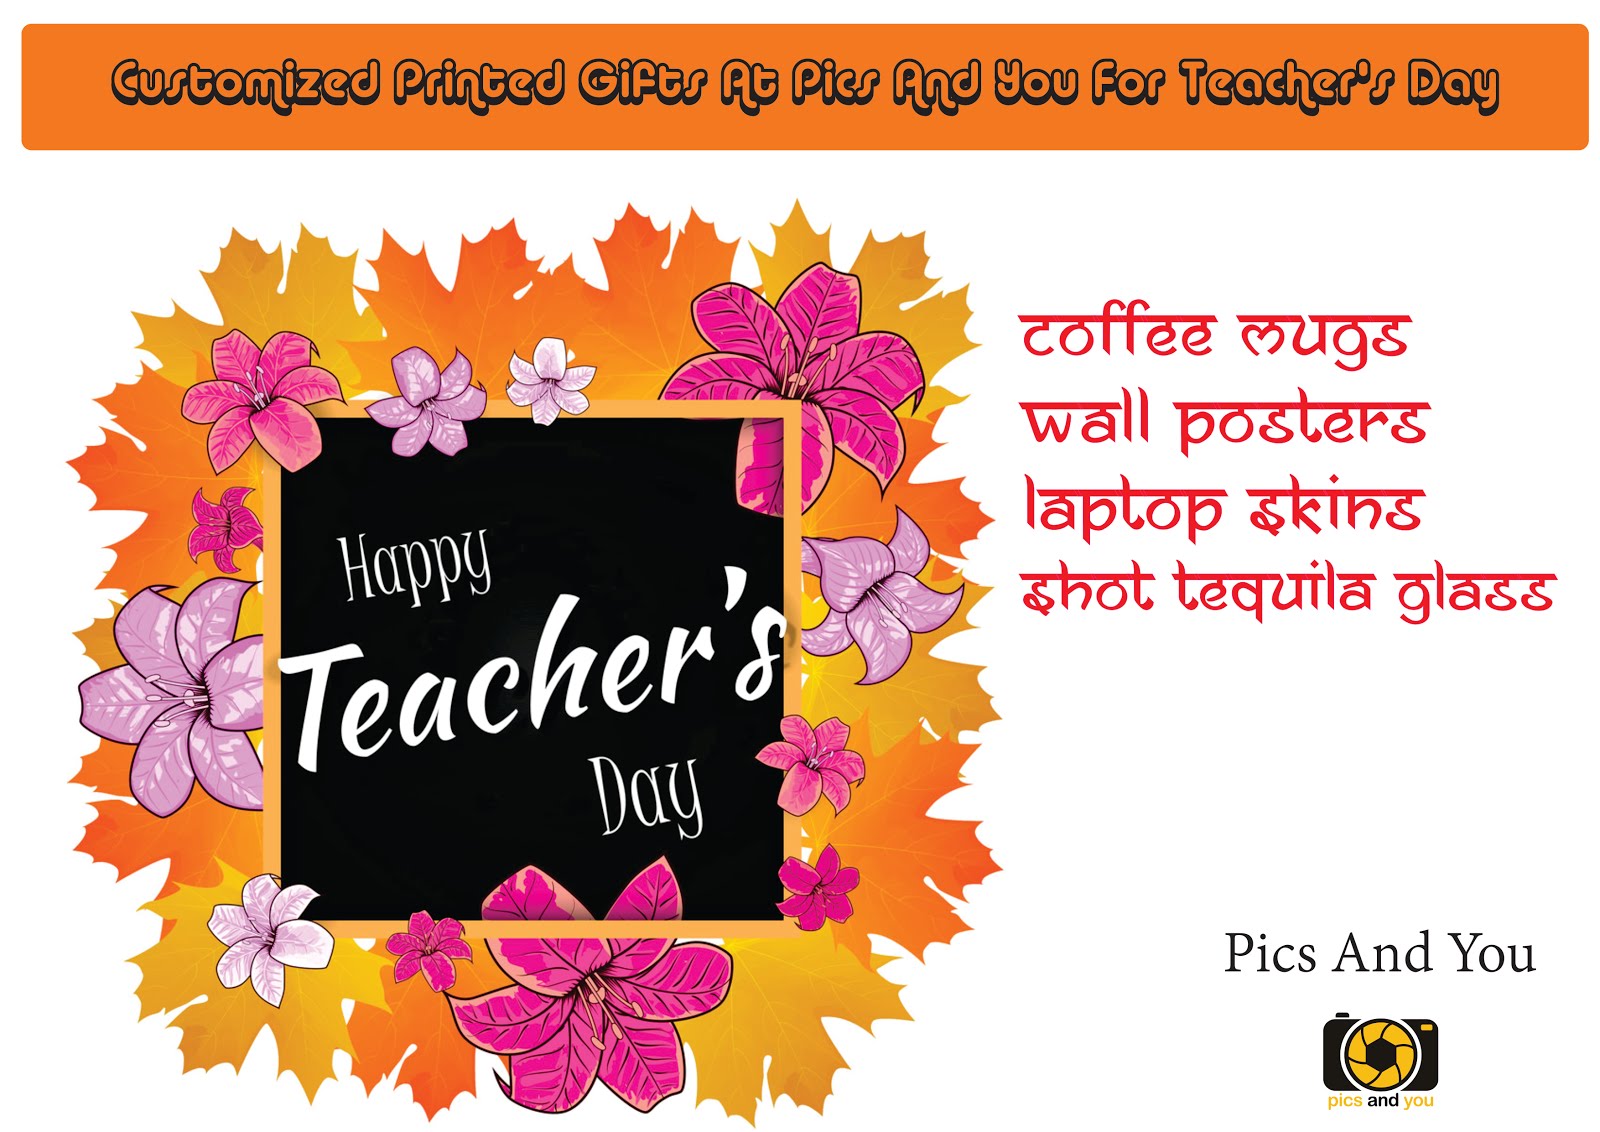 Pics And You Teacher's Day Gift